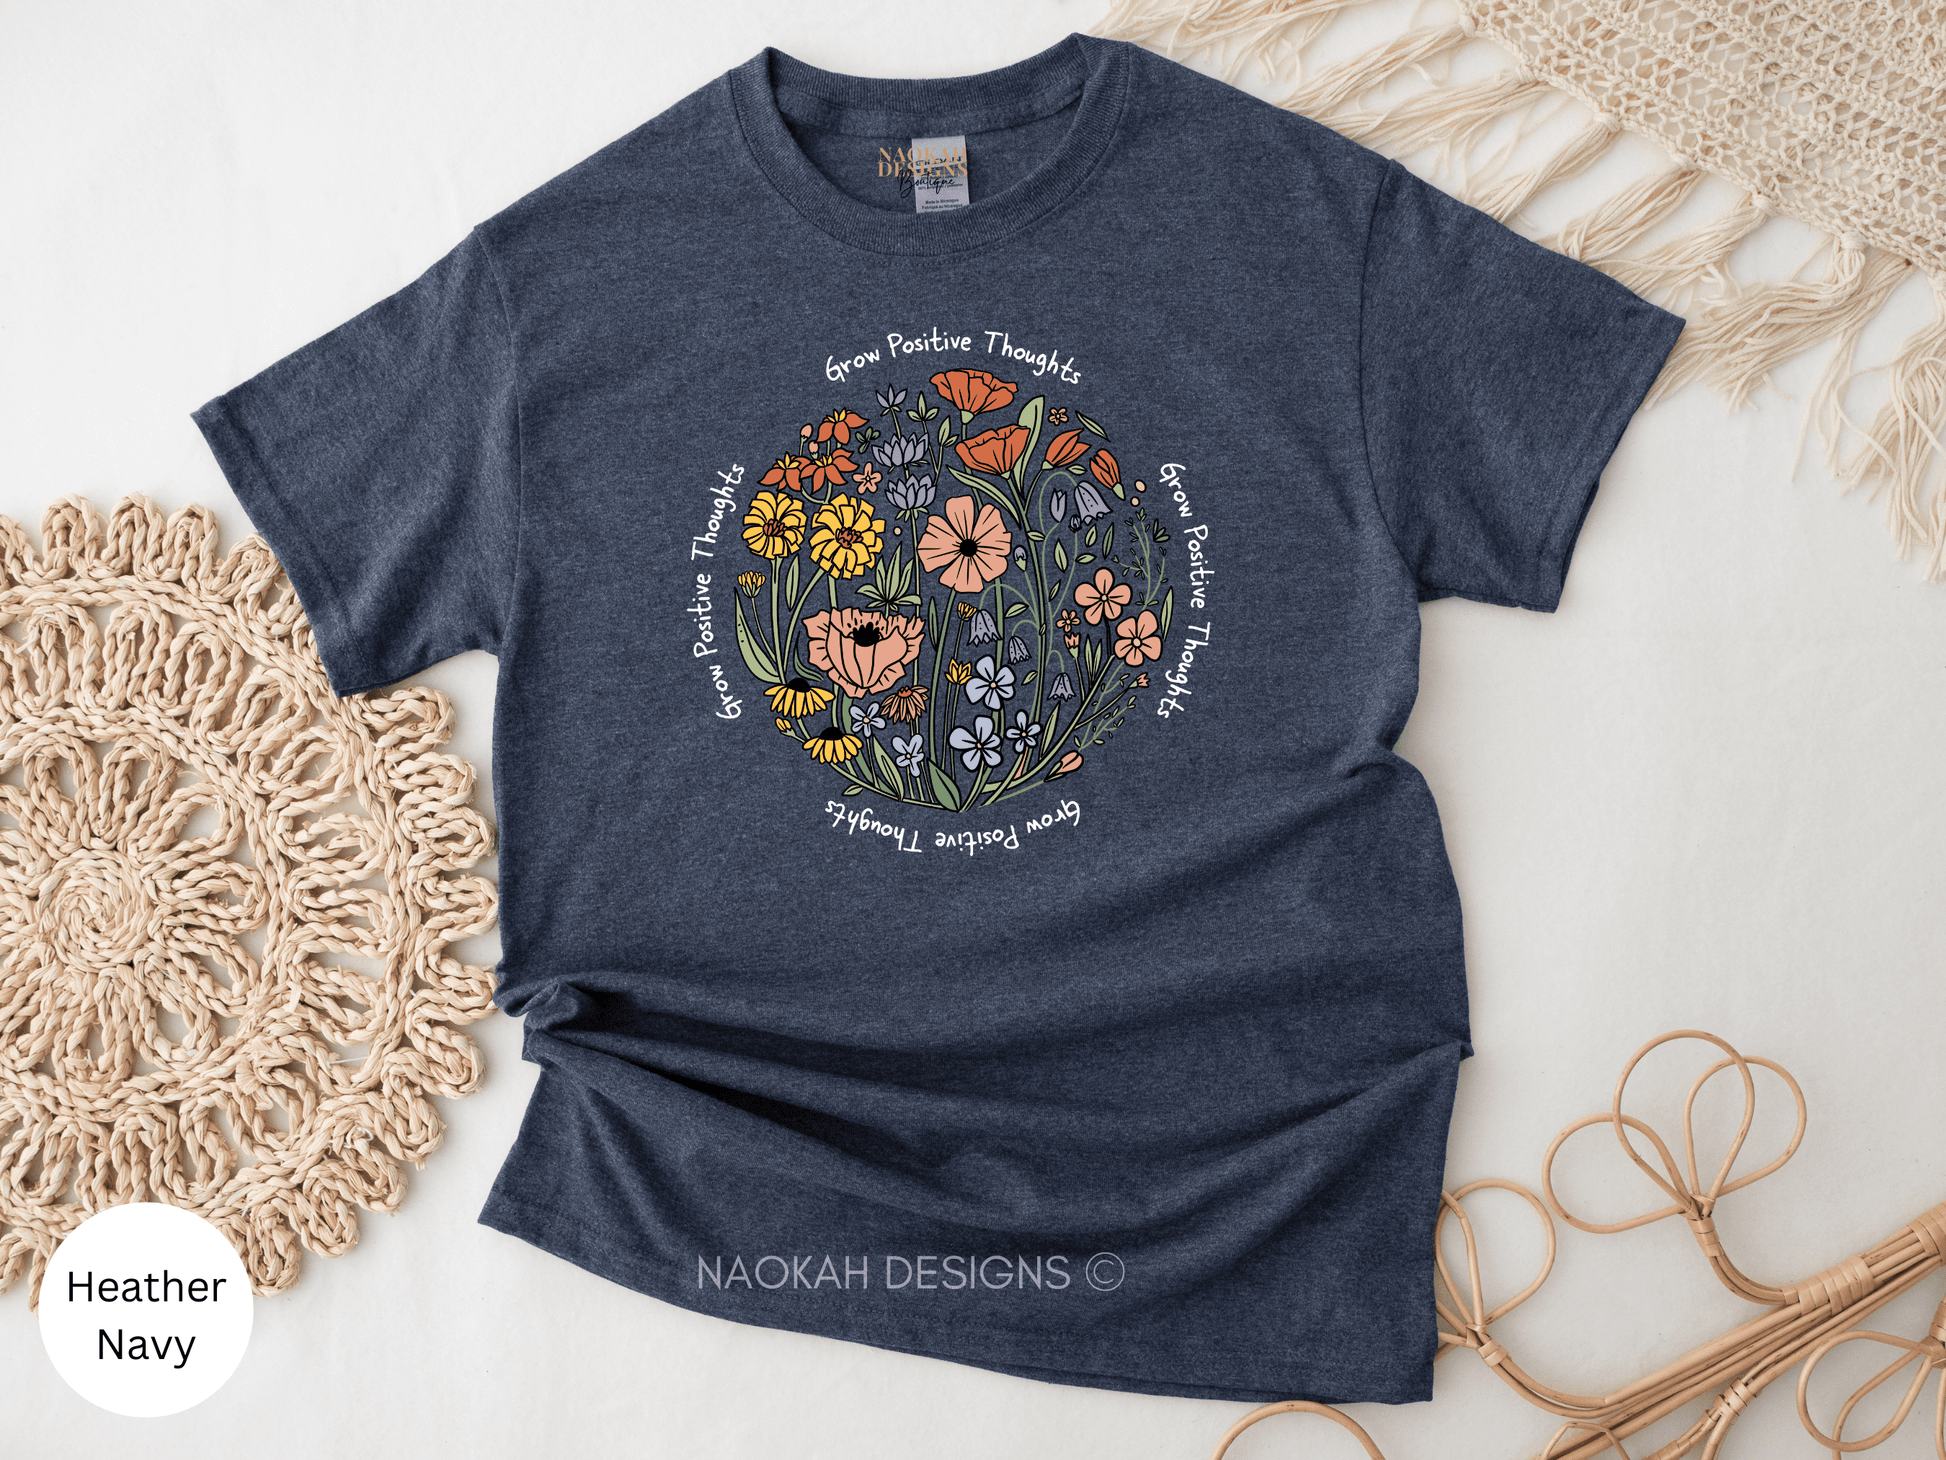 Grow Positive Thoughts Wildflower Shirt, Wildflower Shirt, Flower Gift, Floral Design, Cute Flower, Flower Lover Gift, Wild Flowers Shirt, Floral Tshirt, Flower Shirt, Gift for Women, Ladies Shirts, Best Friend Gift, Grow Positive Thoughts